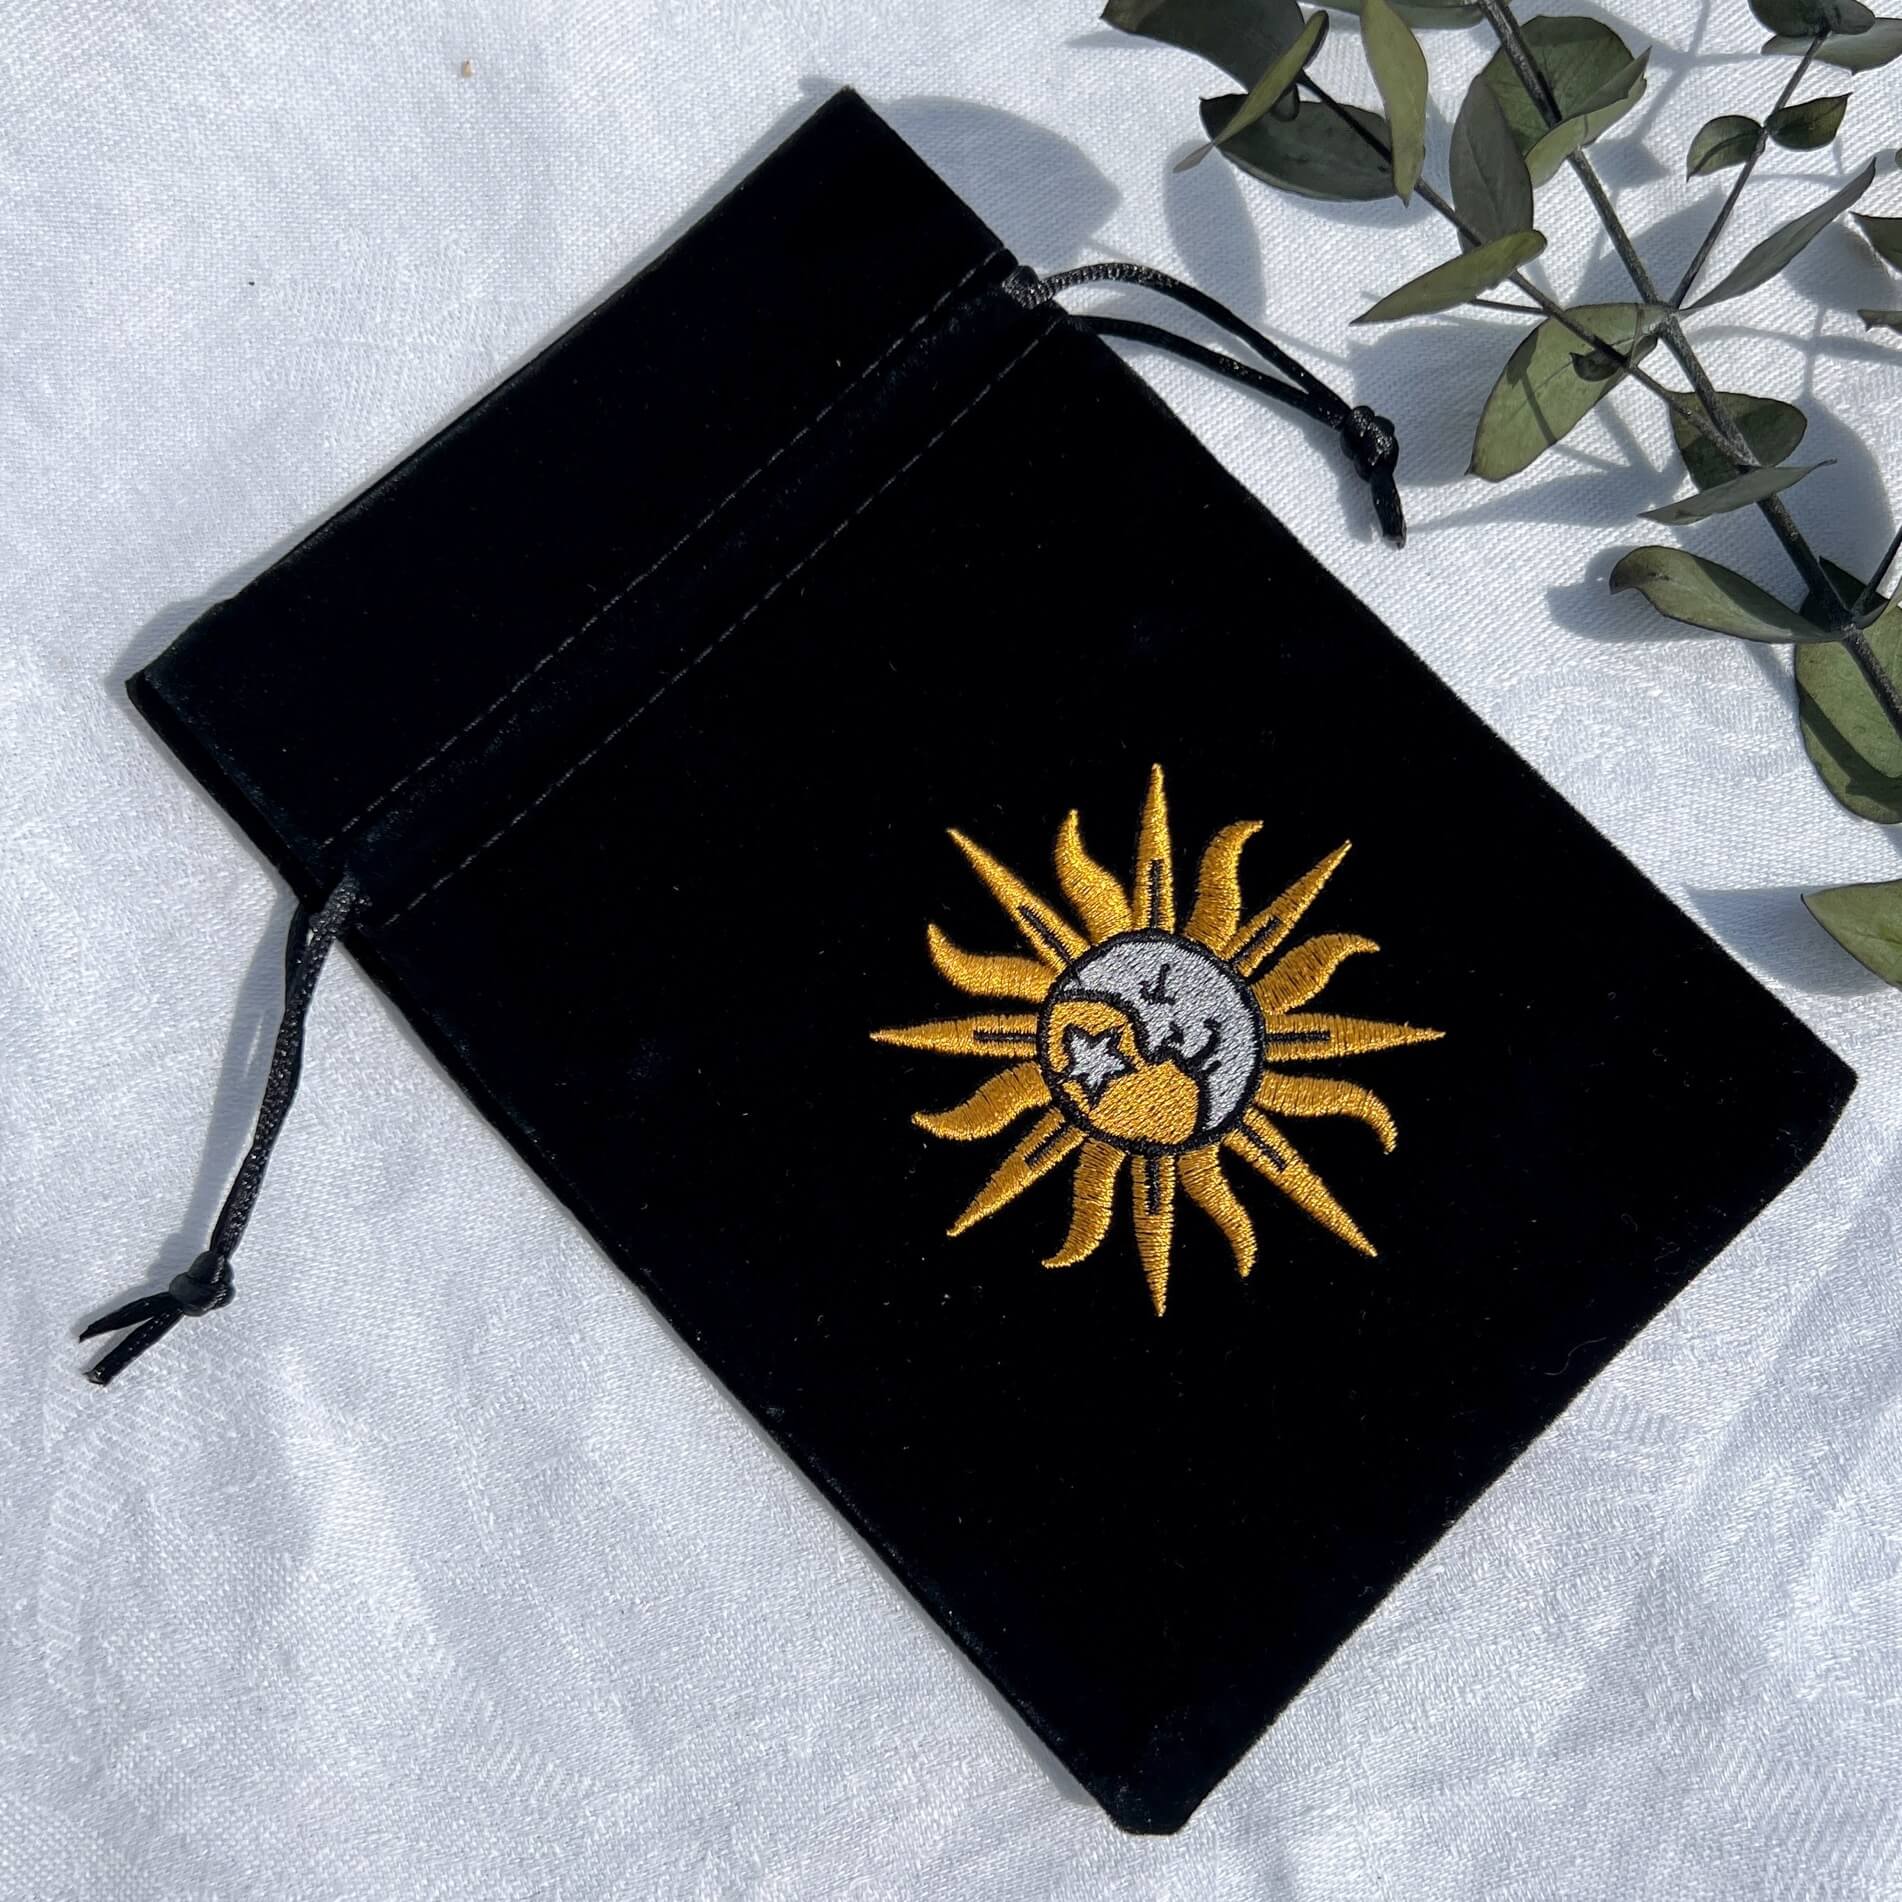 Black velvet celestial oracle card bag with an embroidered sun and moon emblem